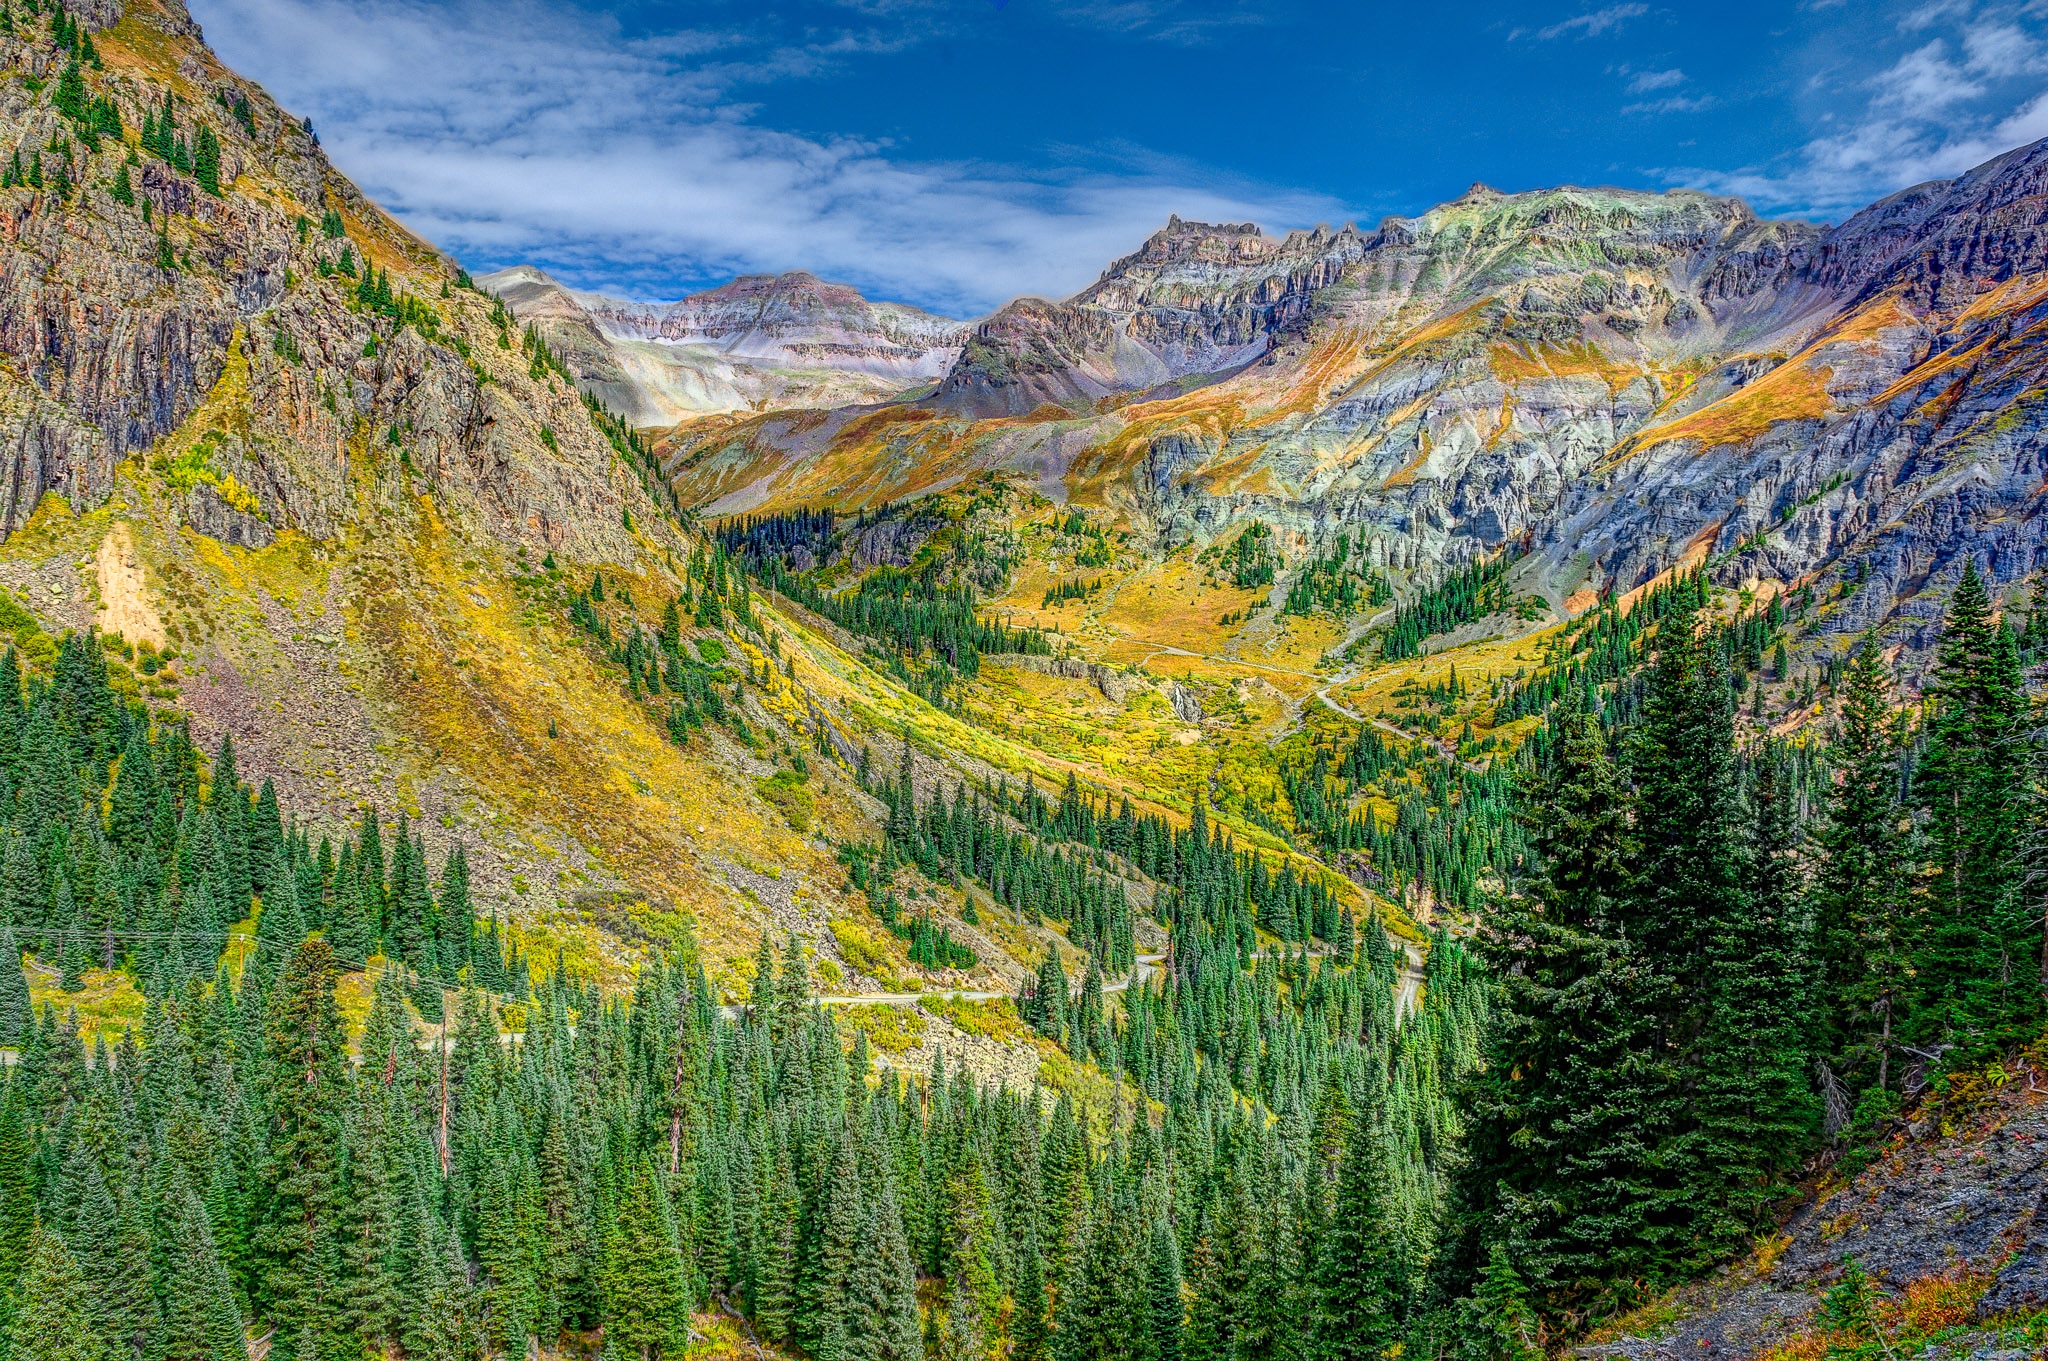 A view back along Governor's Basin Road toward Yankee Boy Basin, with Lower Twin Falls in the distance.